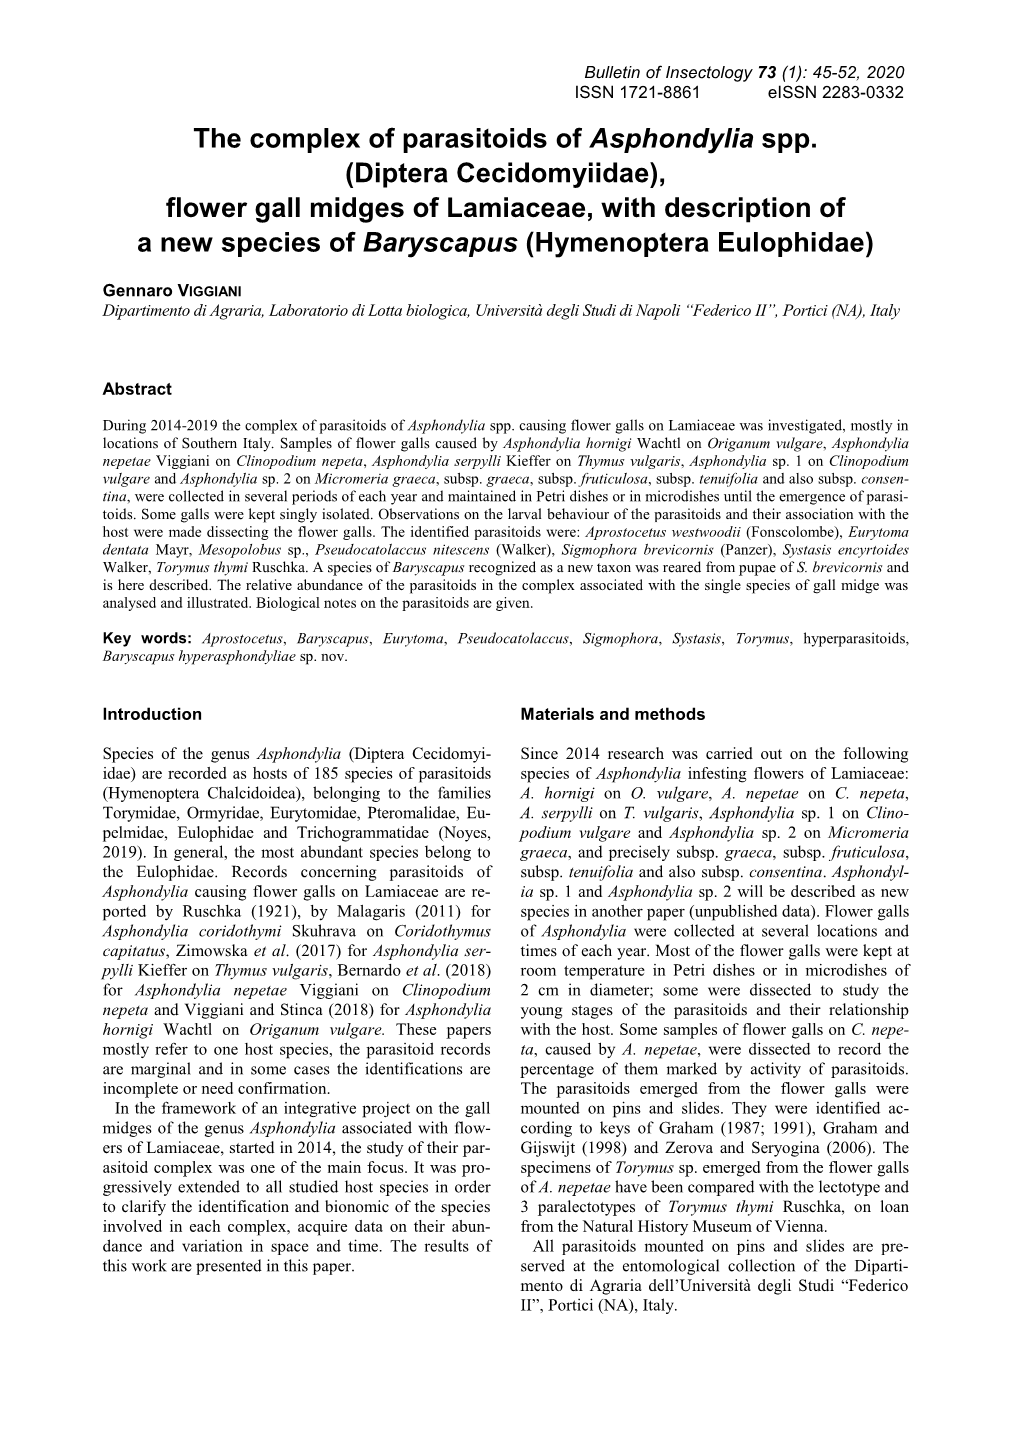 The Complex of Parasitoids of Asphondylia Spp. (Diptera